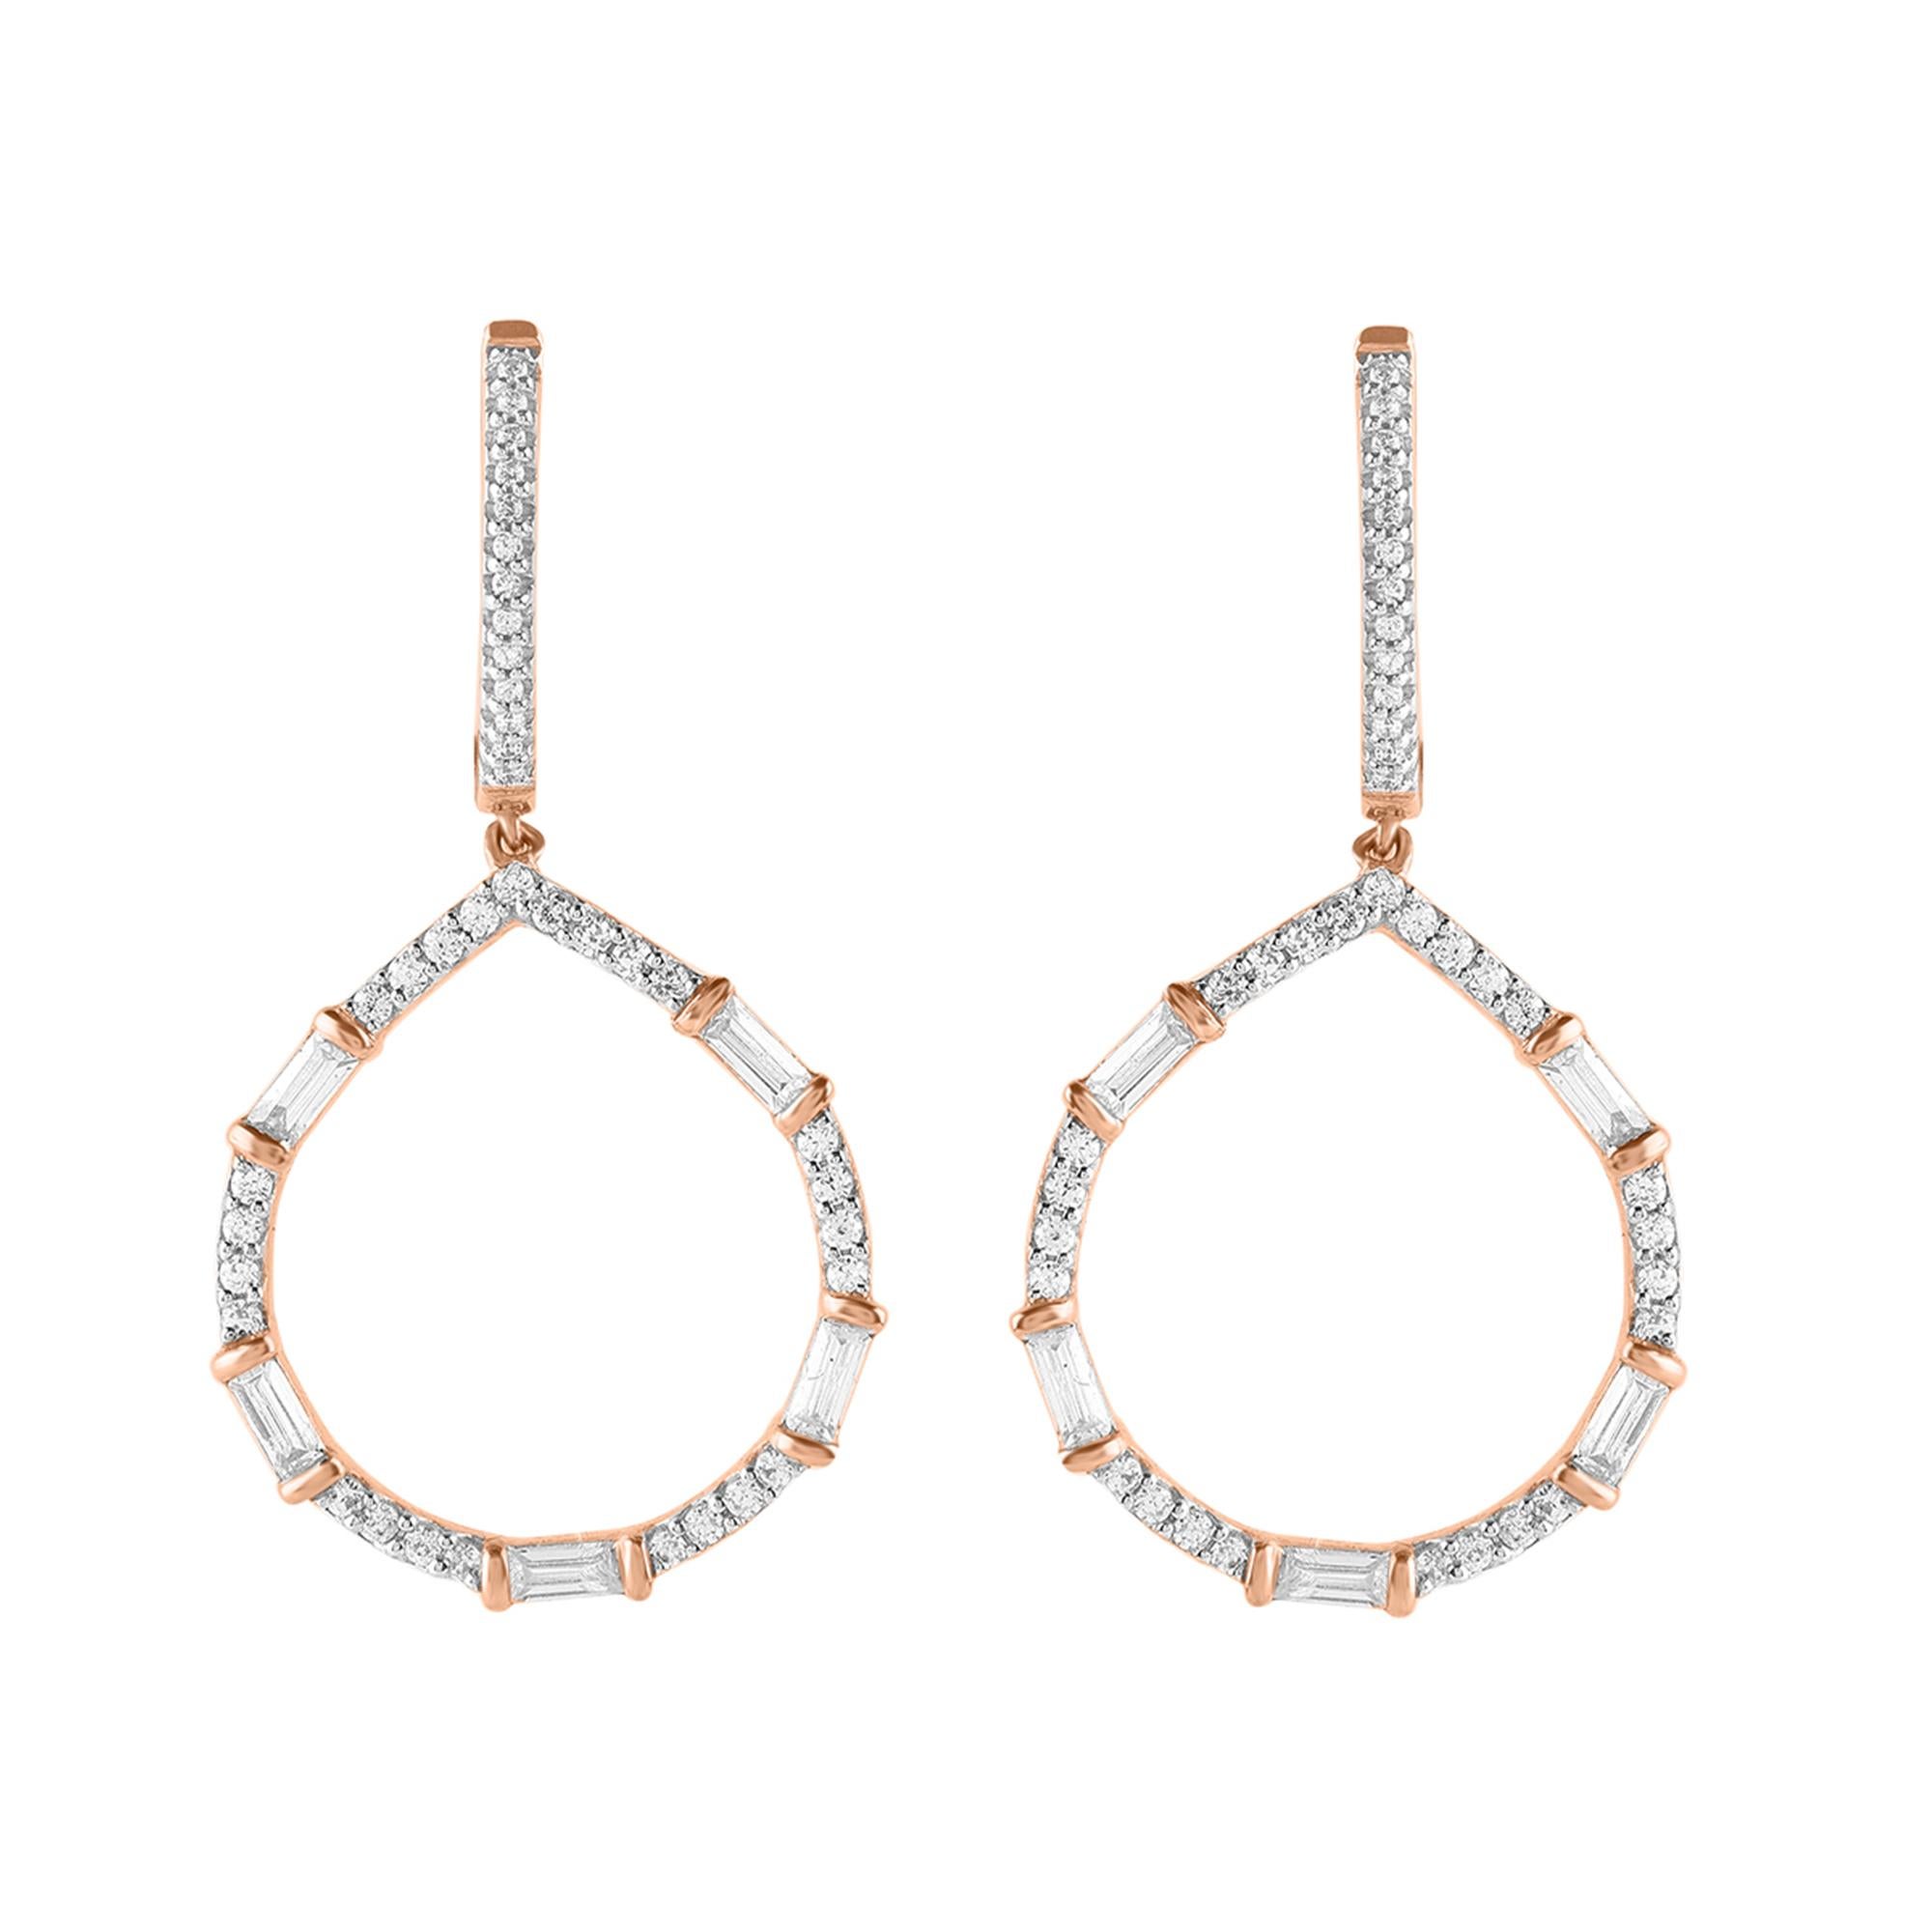 Just her style, these sparkling diamond teardrop earrings are certain to dazzle and delight. Handcrafted by our experts in 18 karat rose gold and studded with 86 round brilliant and baguette-cut diamond in prong and channel setting, glitters in H-I